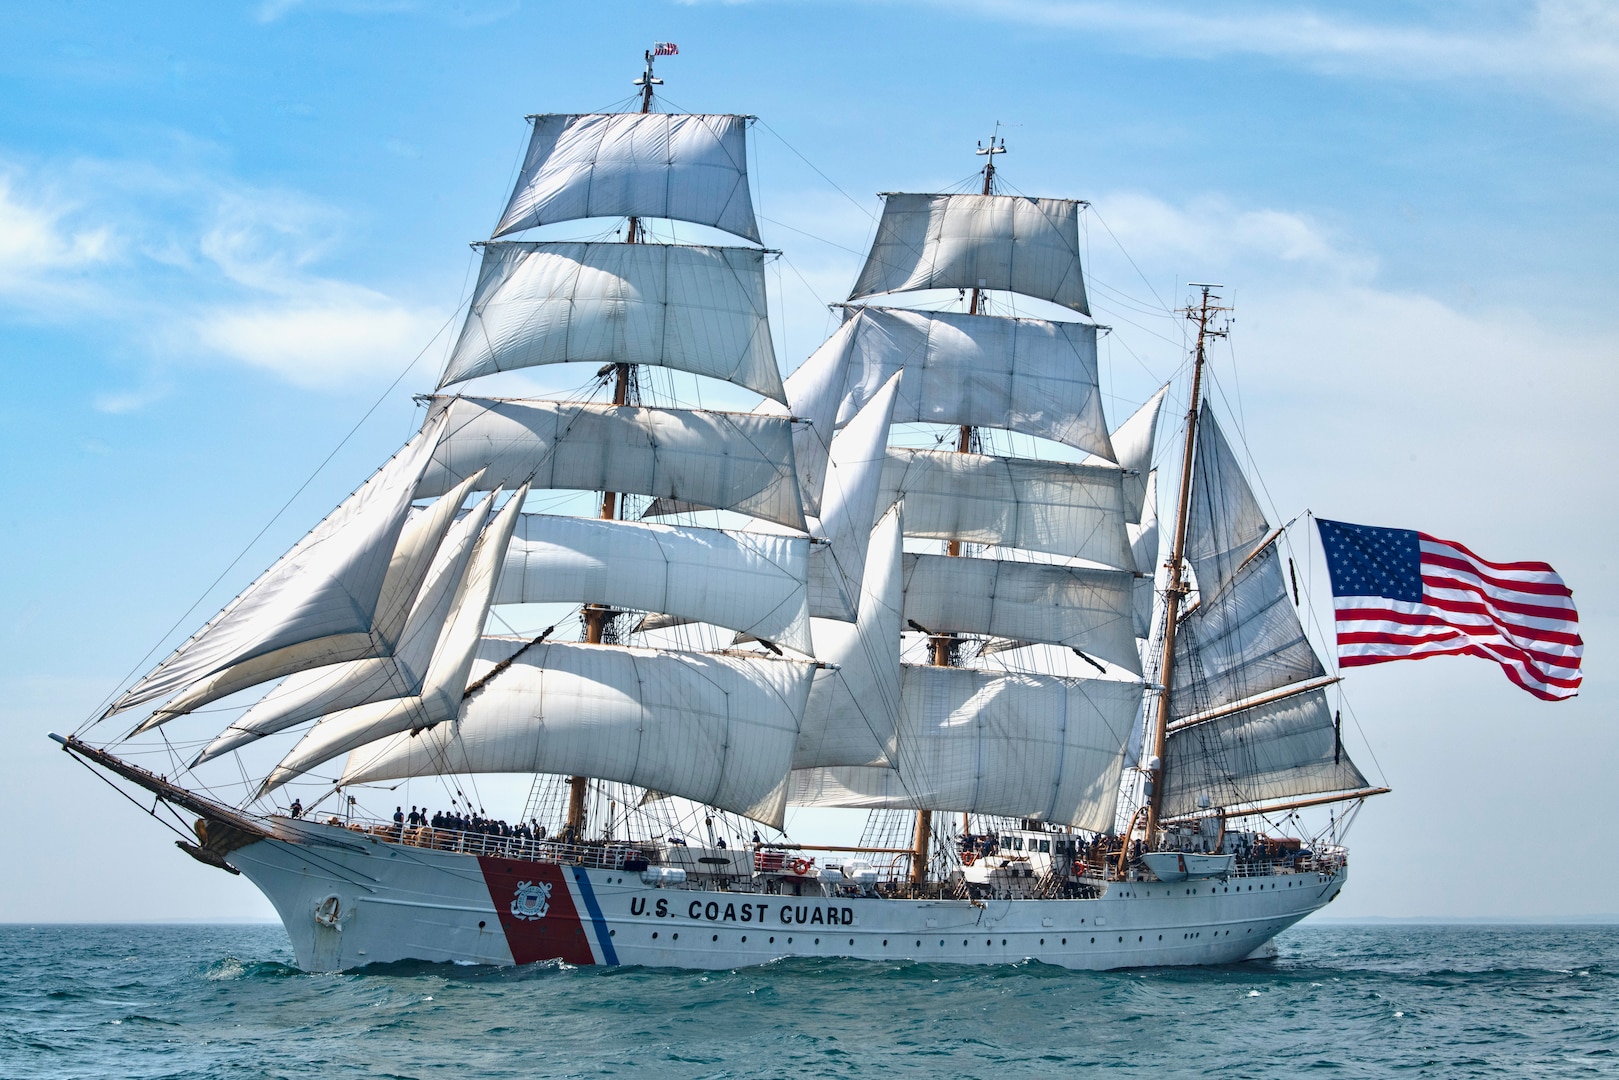 Coast Guard Cutter Eagle sails in Long Island Sound, July 30, 2020. The Eagle has served as a classroom at sea to future Coast Guard officers since 1946, offering an at-sea leadership and professional development experience. (U.S. Coast Guard photo by Petty Officer 3rd Class Matthew Thieme)